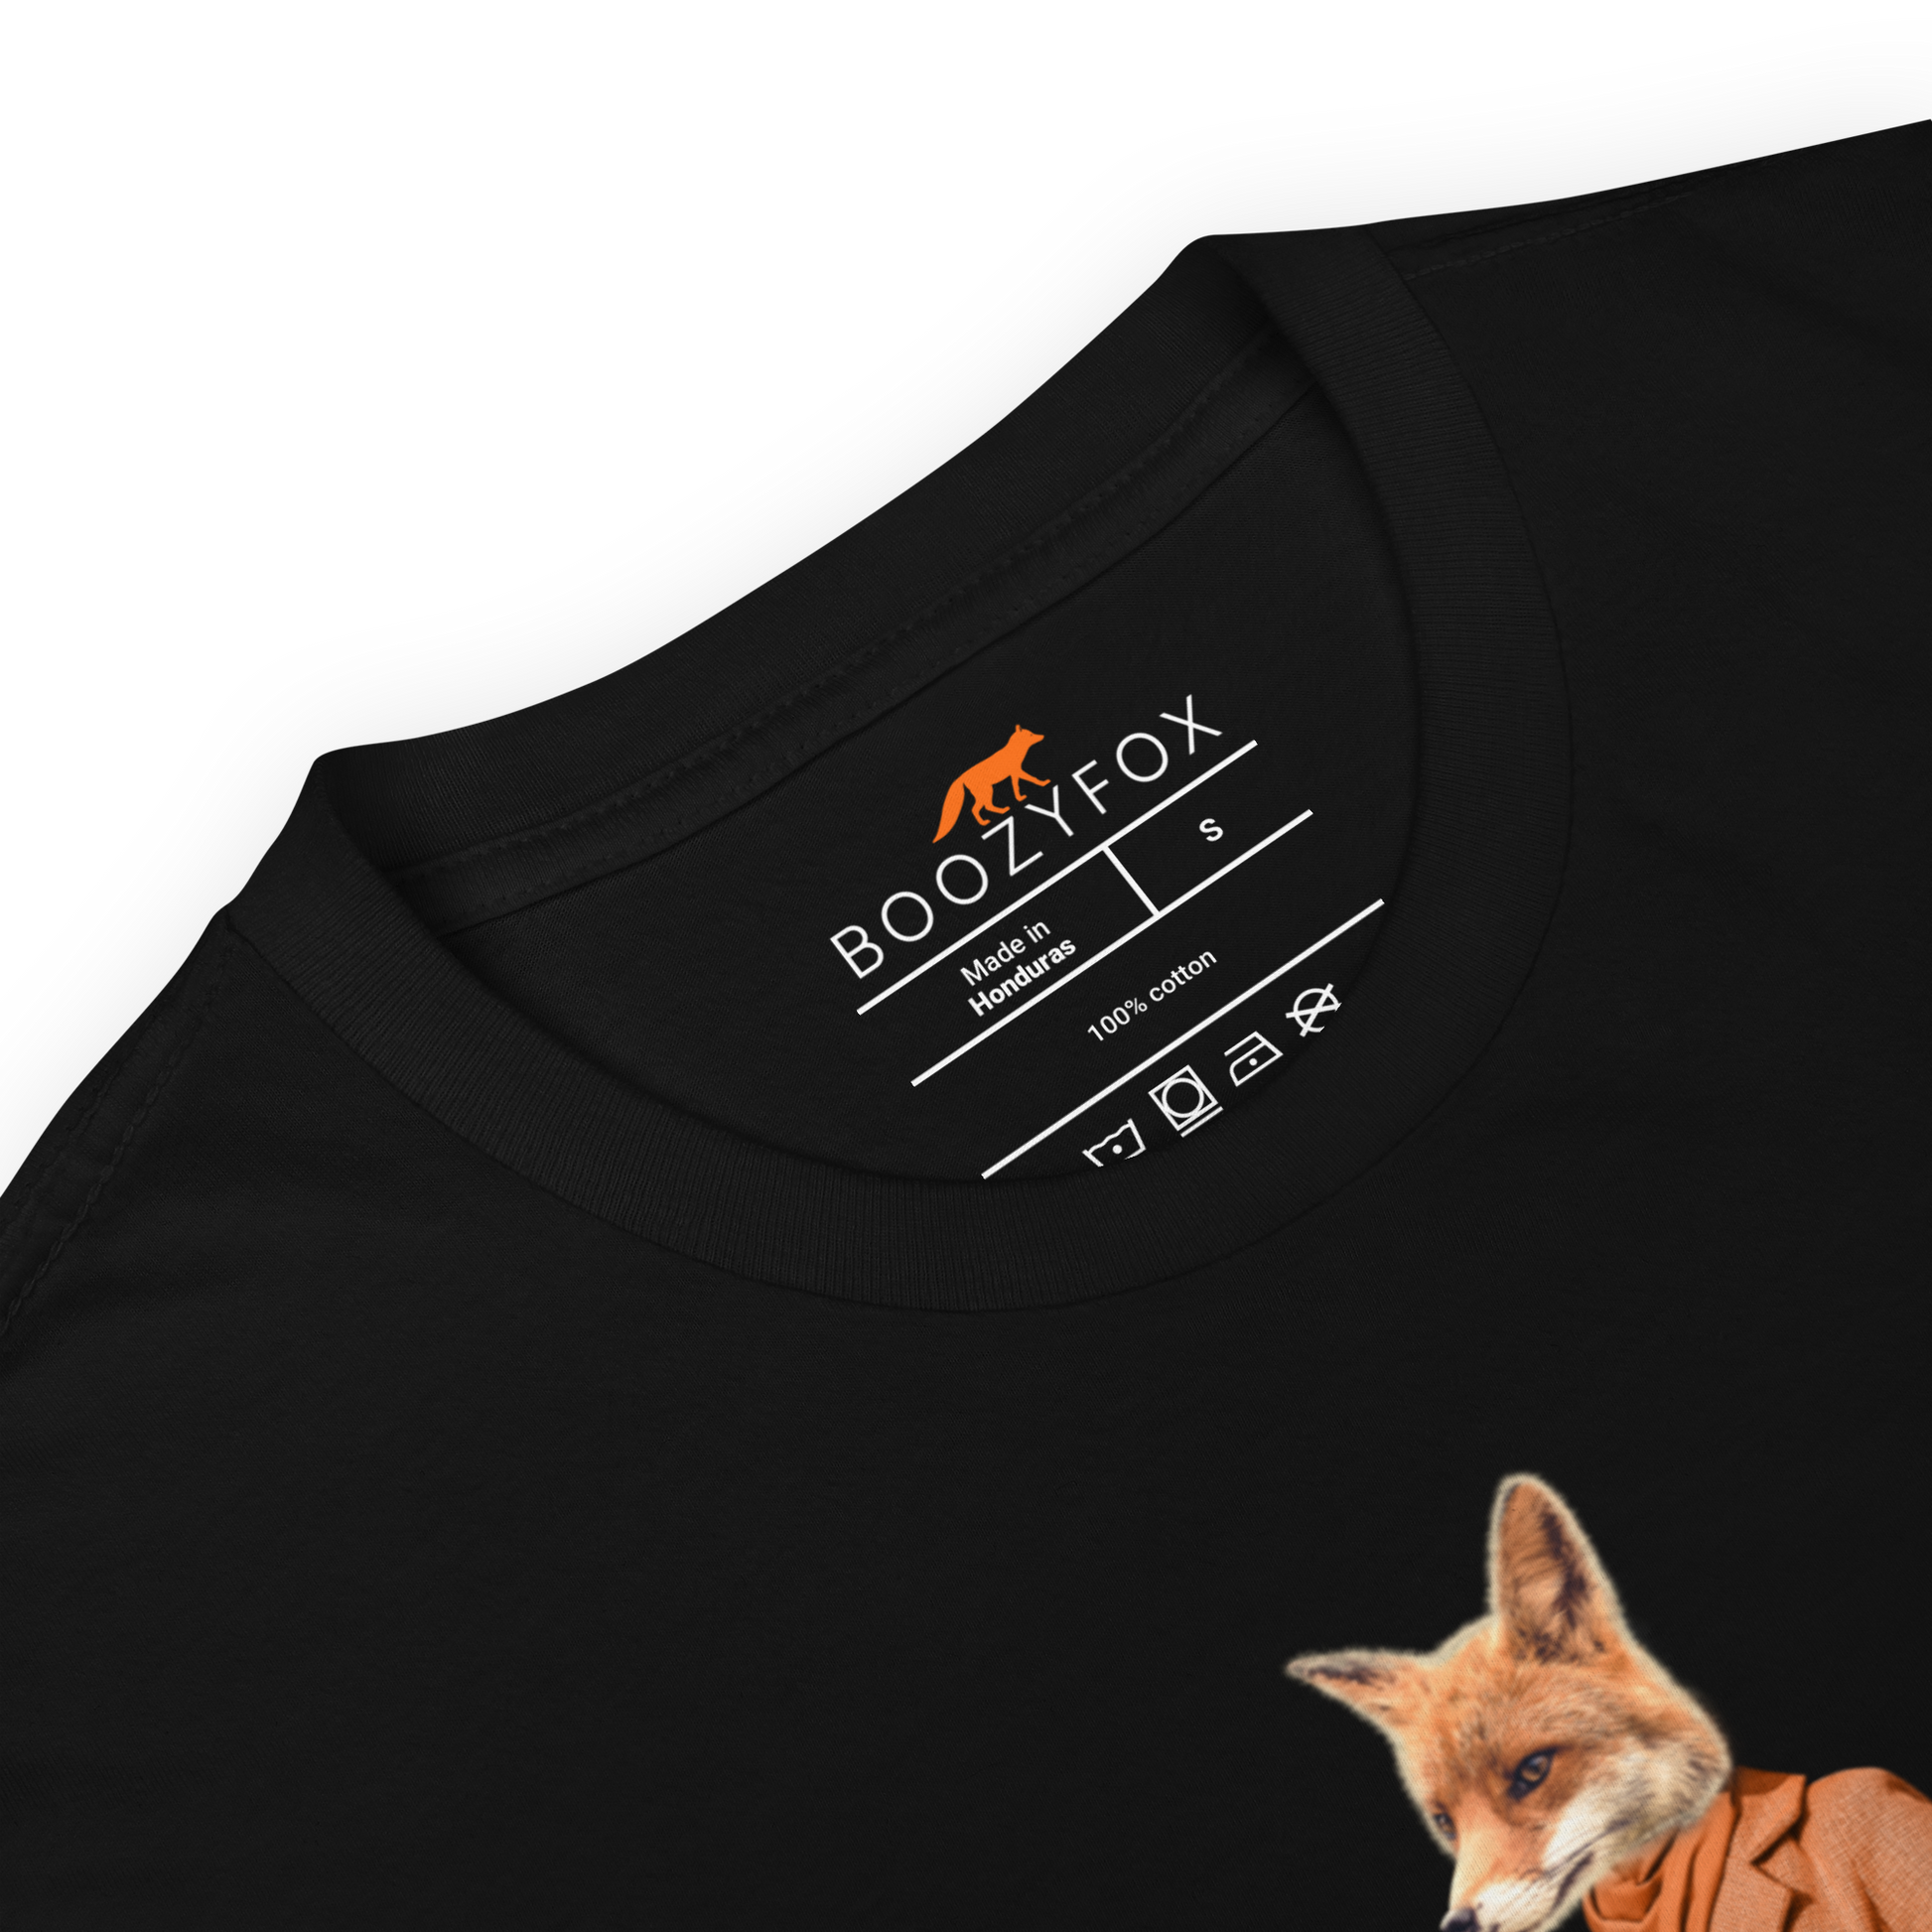 Product Details of a Black Anthropomorphic Fox T-Shirt featuring a sly Anthropomorphic Fox In a Trench Coat graphic on the chest - Funny Graphic Fox T-Shirts - Boozy Fox